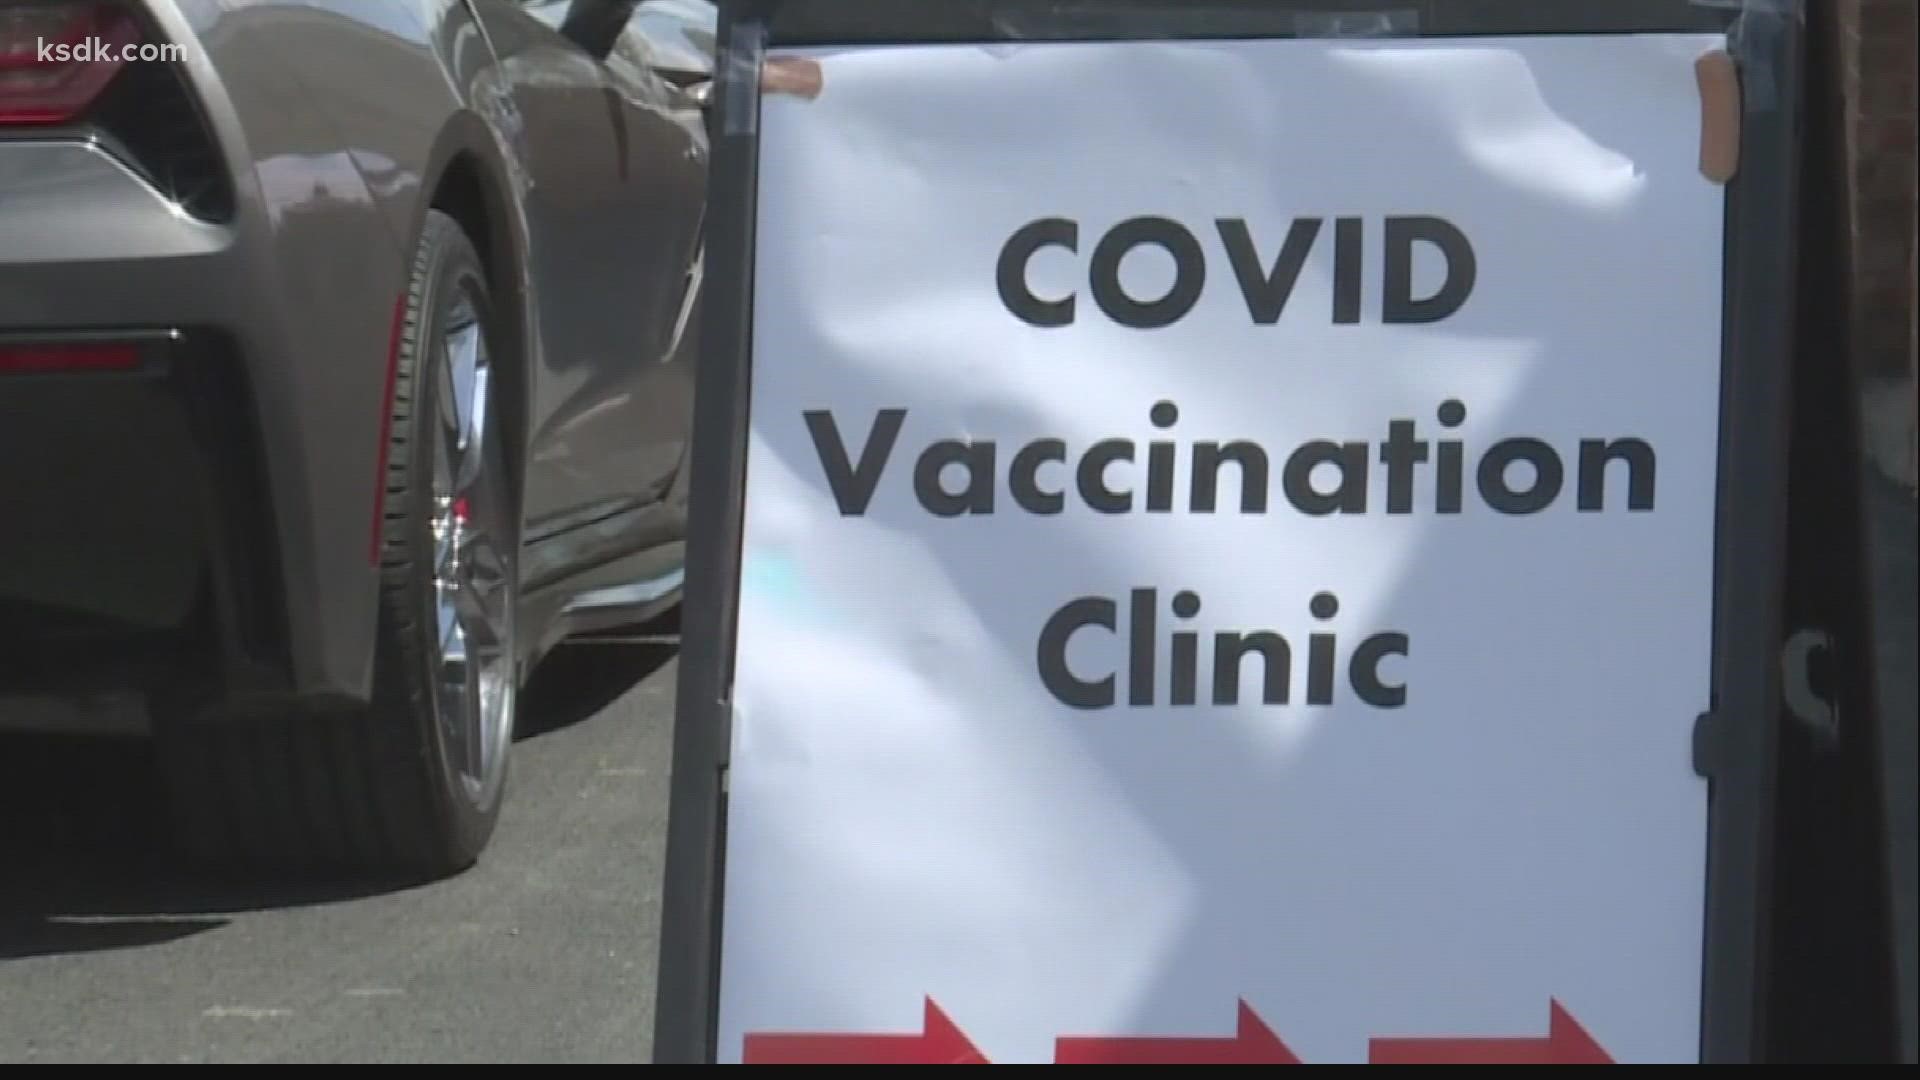 The first vaccination clinics where people can get gift cards through the city’s incentive program are planned for this weekend.